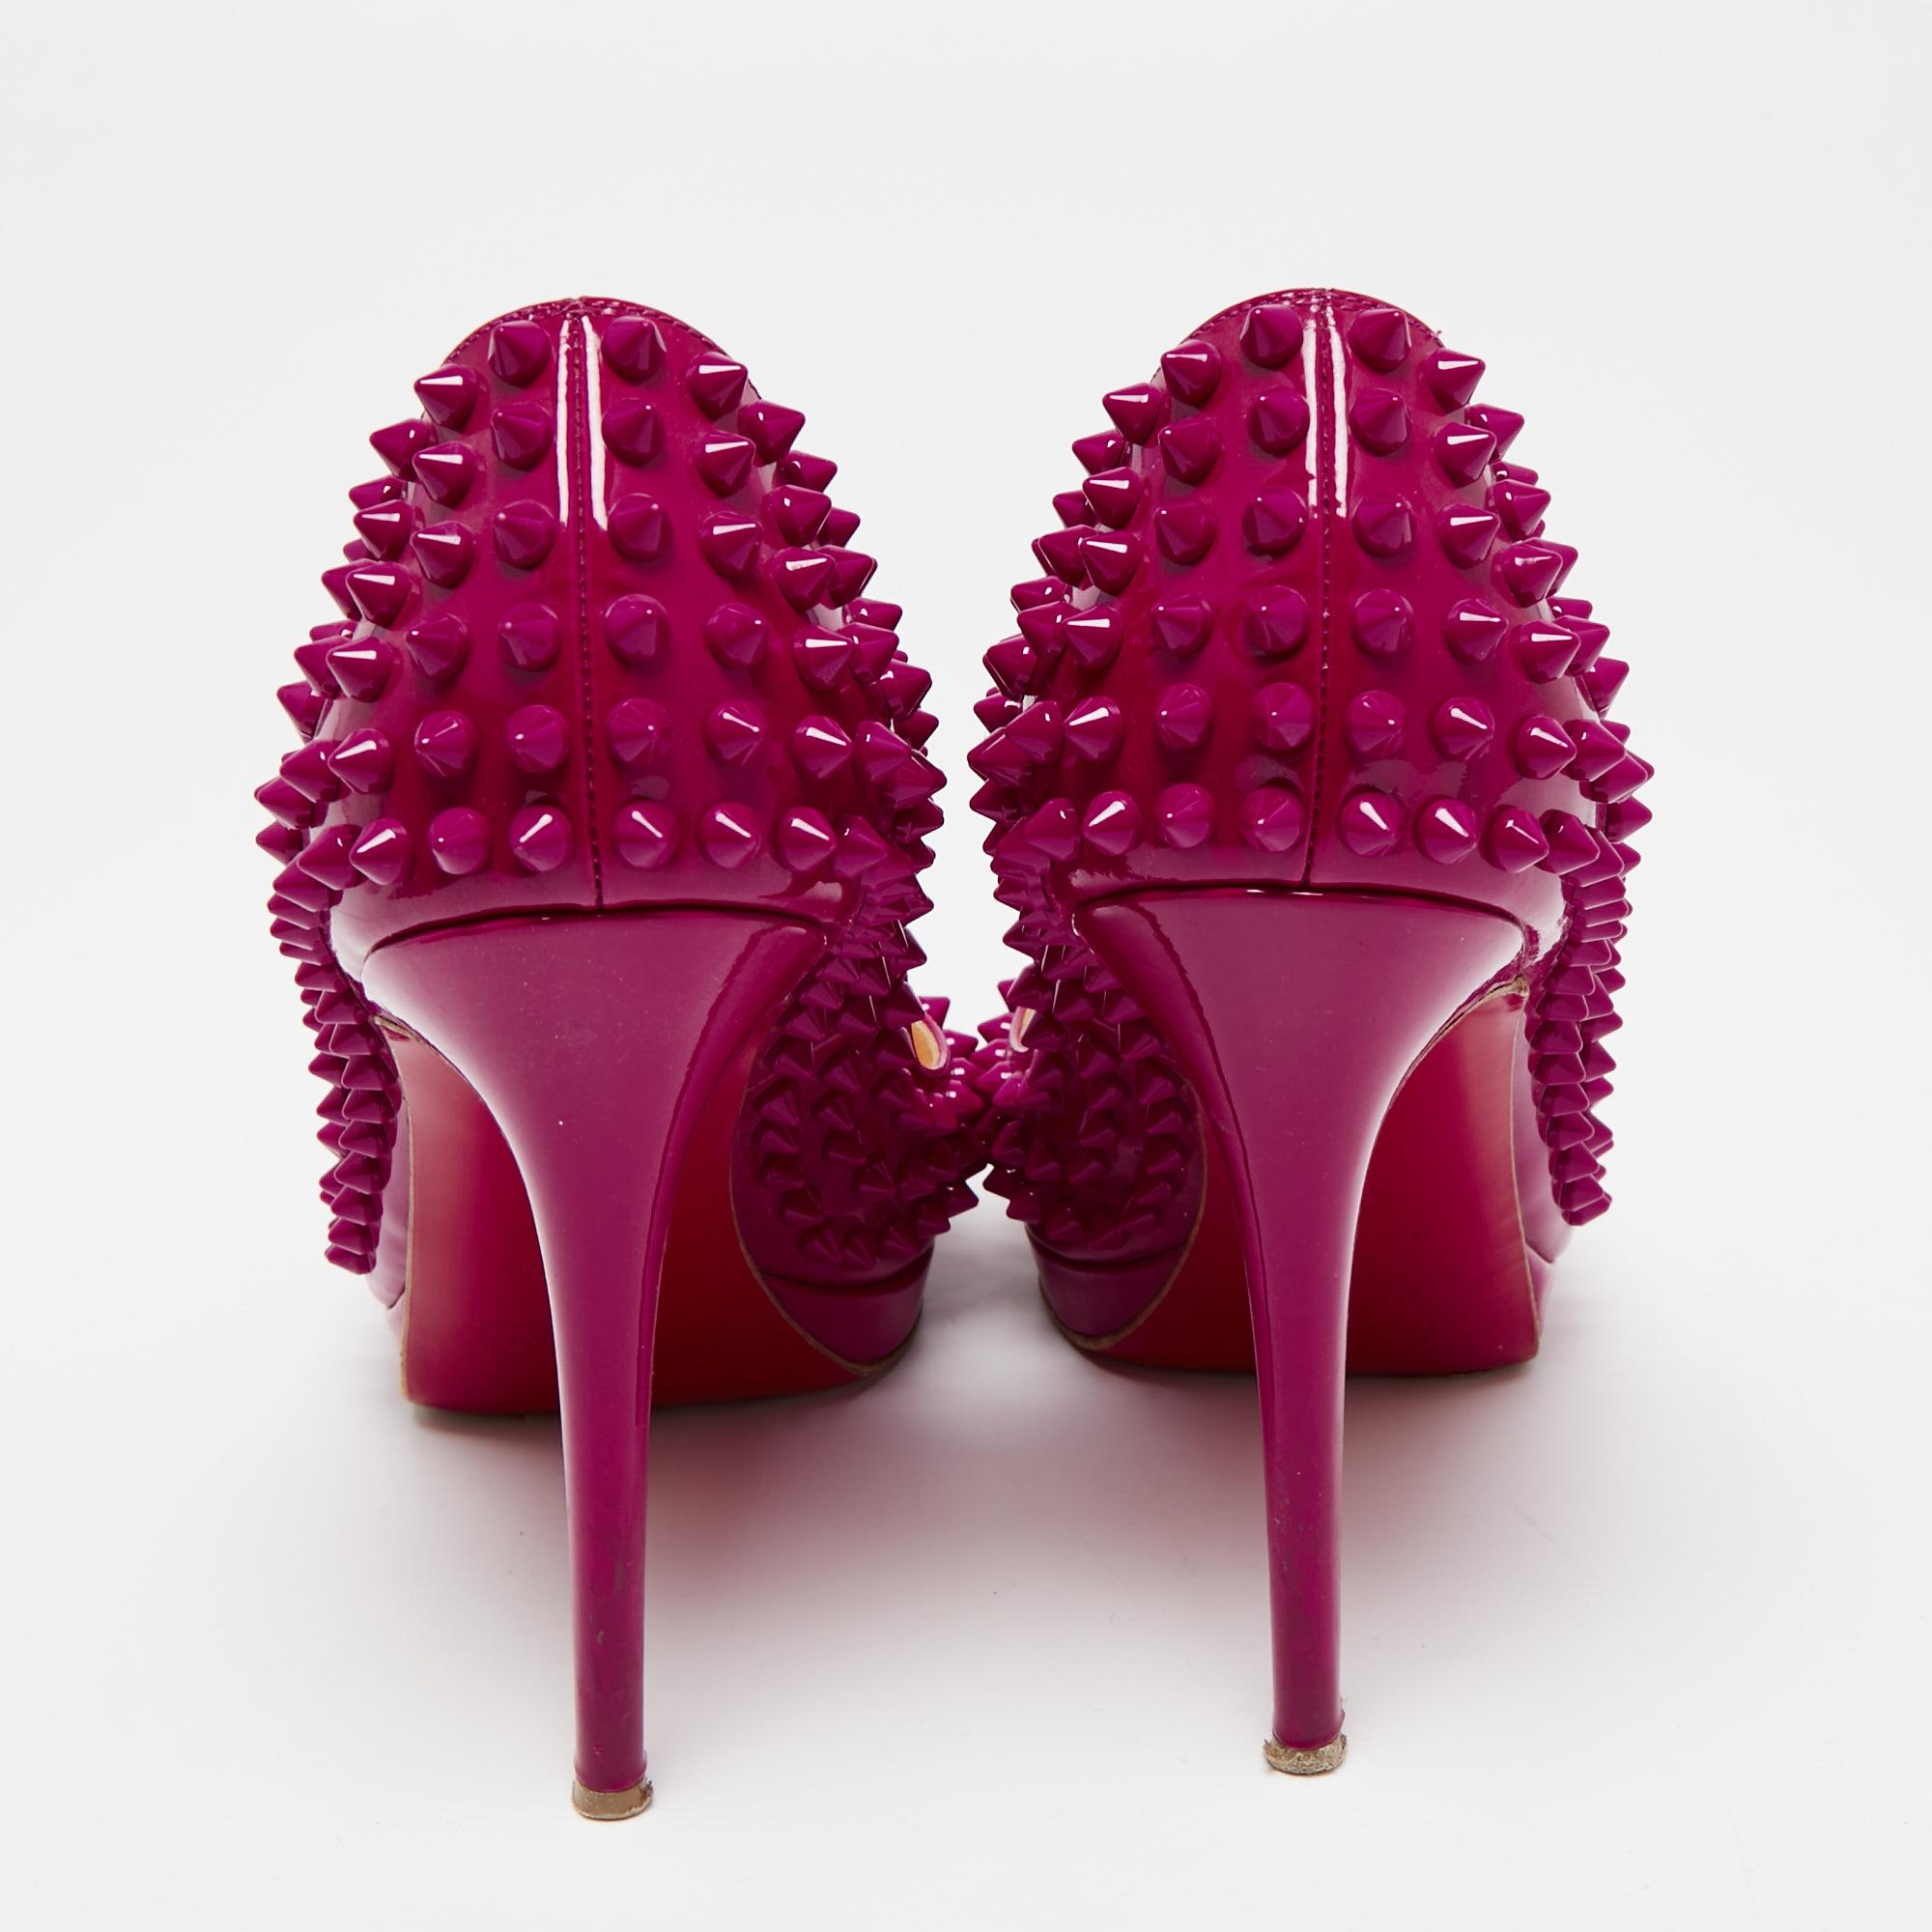 Christian Louboutin Patent Leather Yolanda Spiked Peep-Toe Pumps Size 38.5 For Sale 1